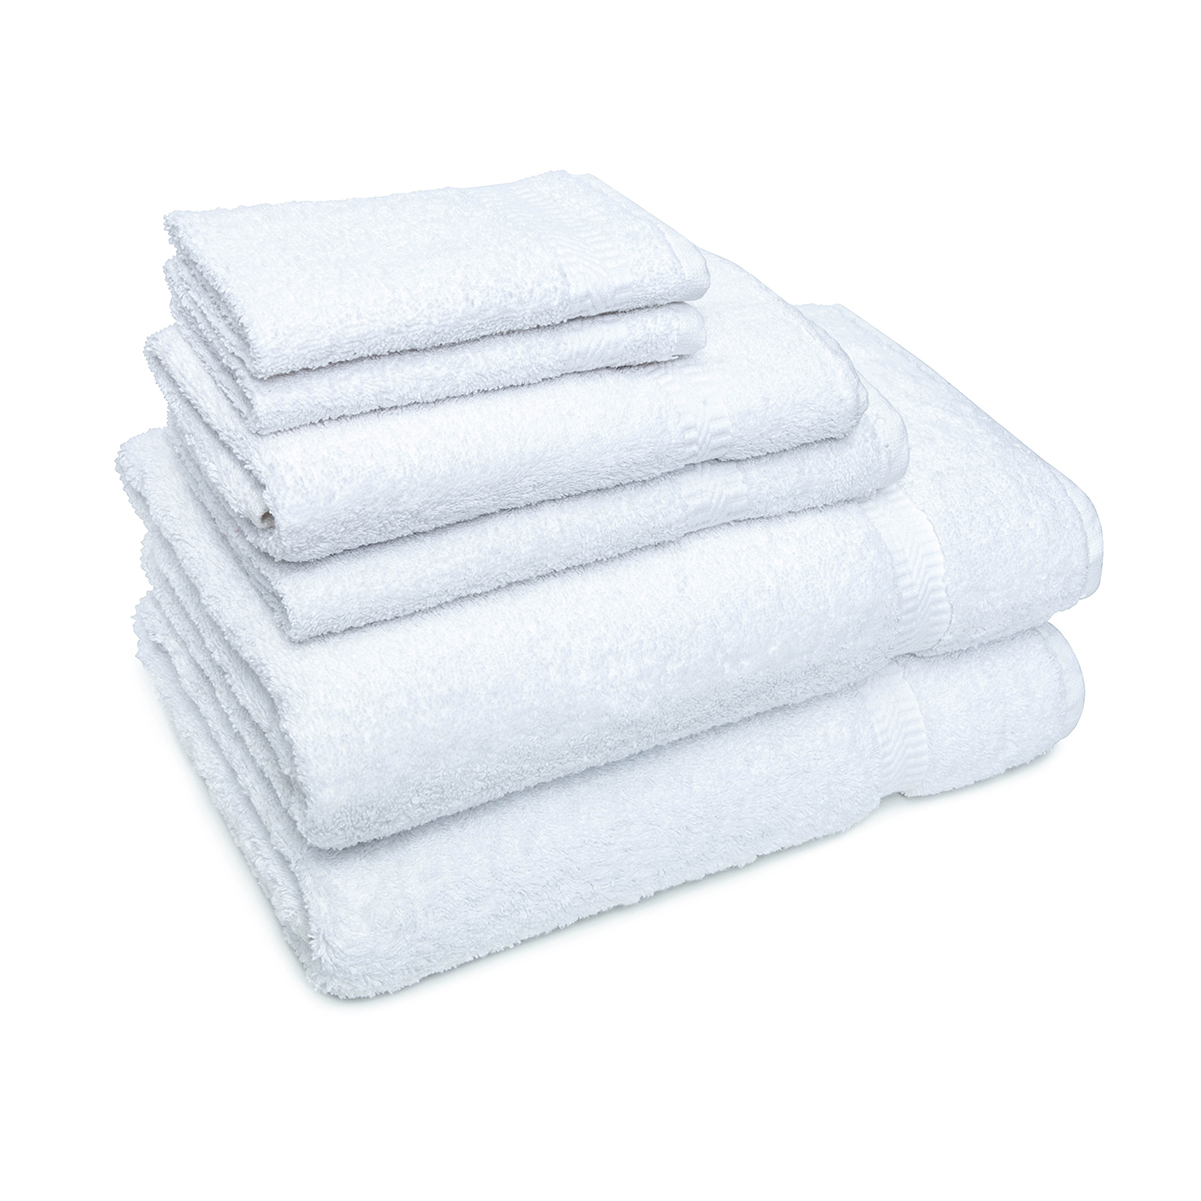 What type of finish do the Plush White Hotel Guestroom ADI Towels have?